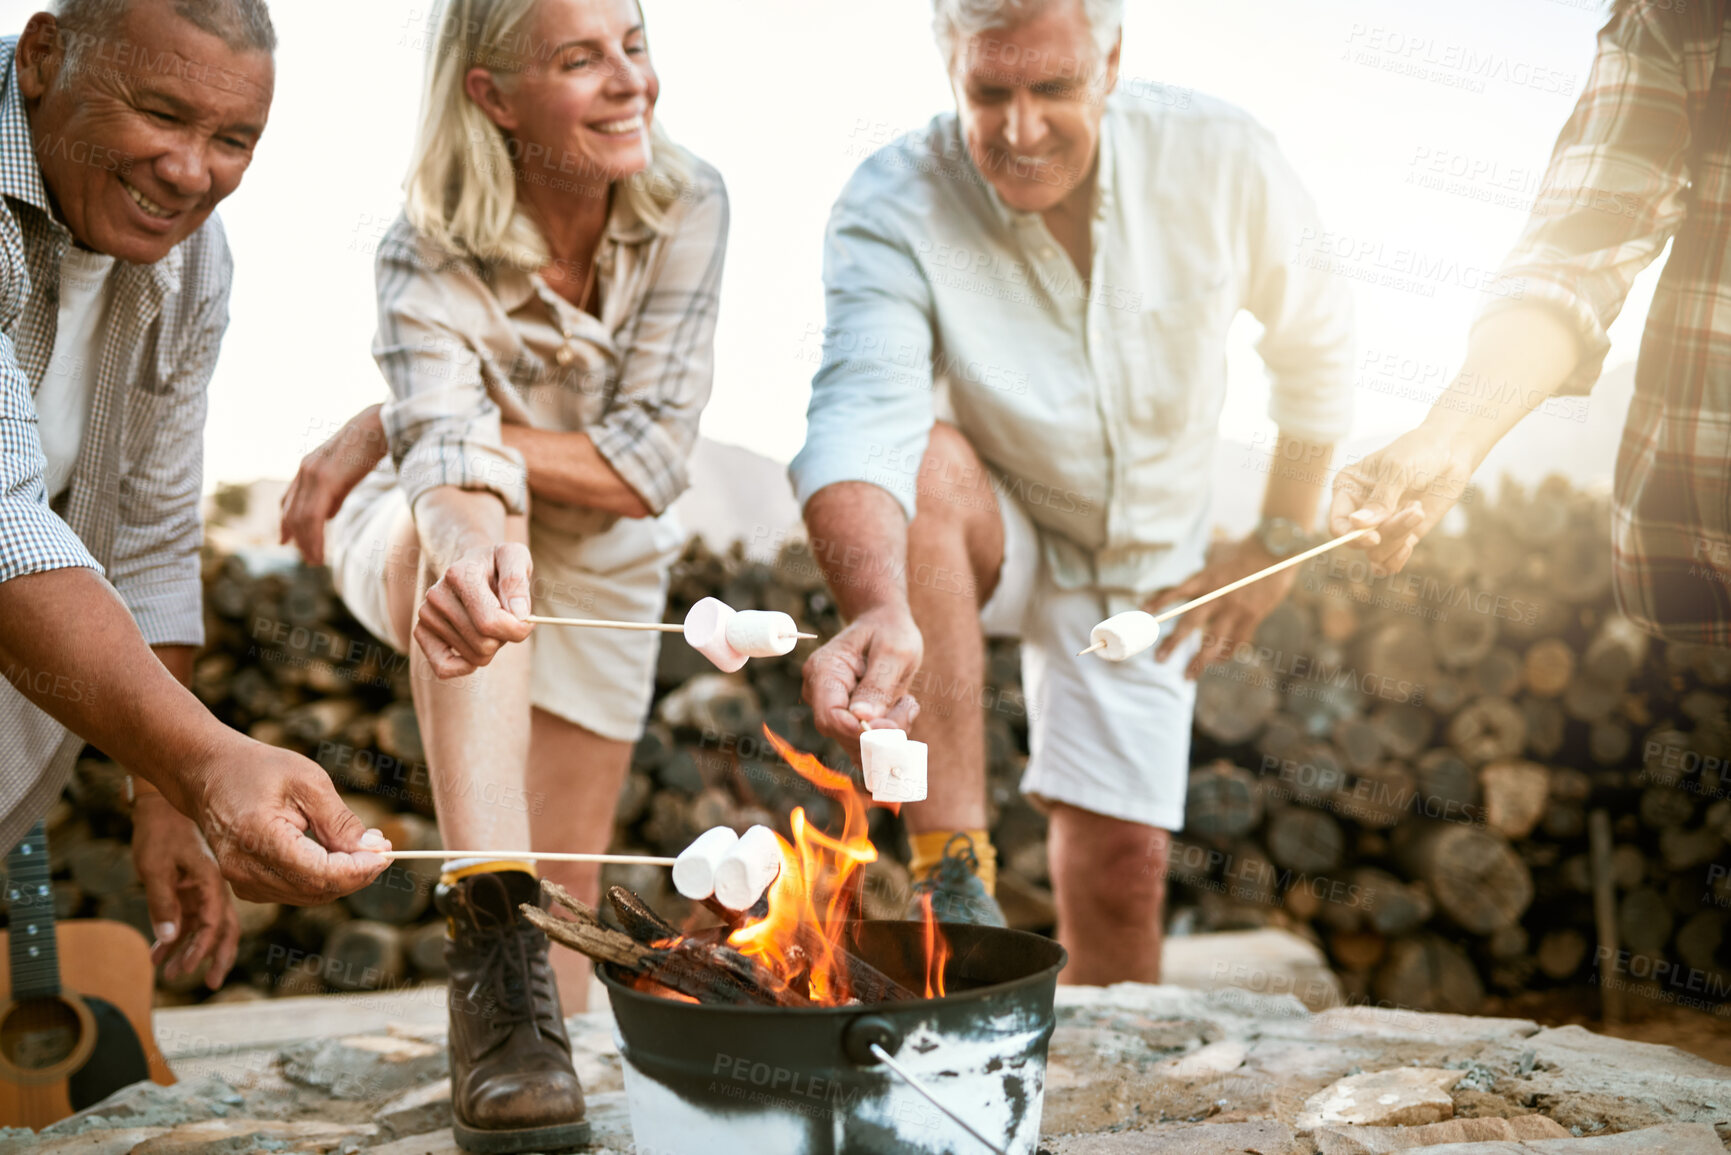 Buy stock photo Camping, hiking and adventure senior people melting marshmallows in a camp fire during a nature retreat or getaway outdoors. Happy retired or senior group of friends enjoying fun recreation activity